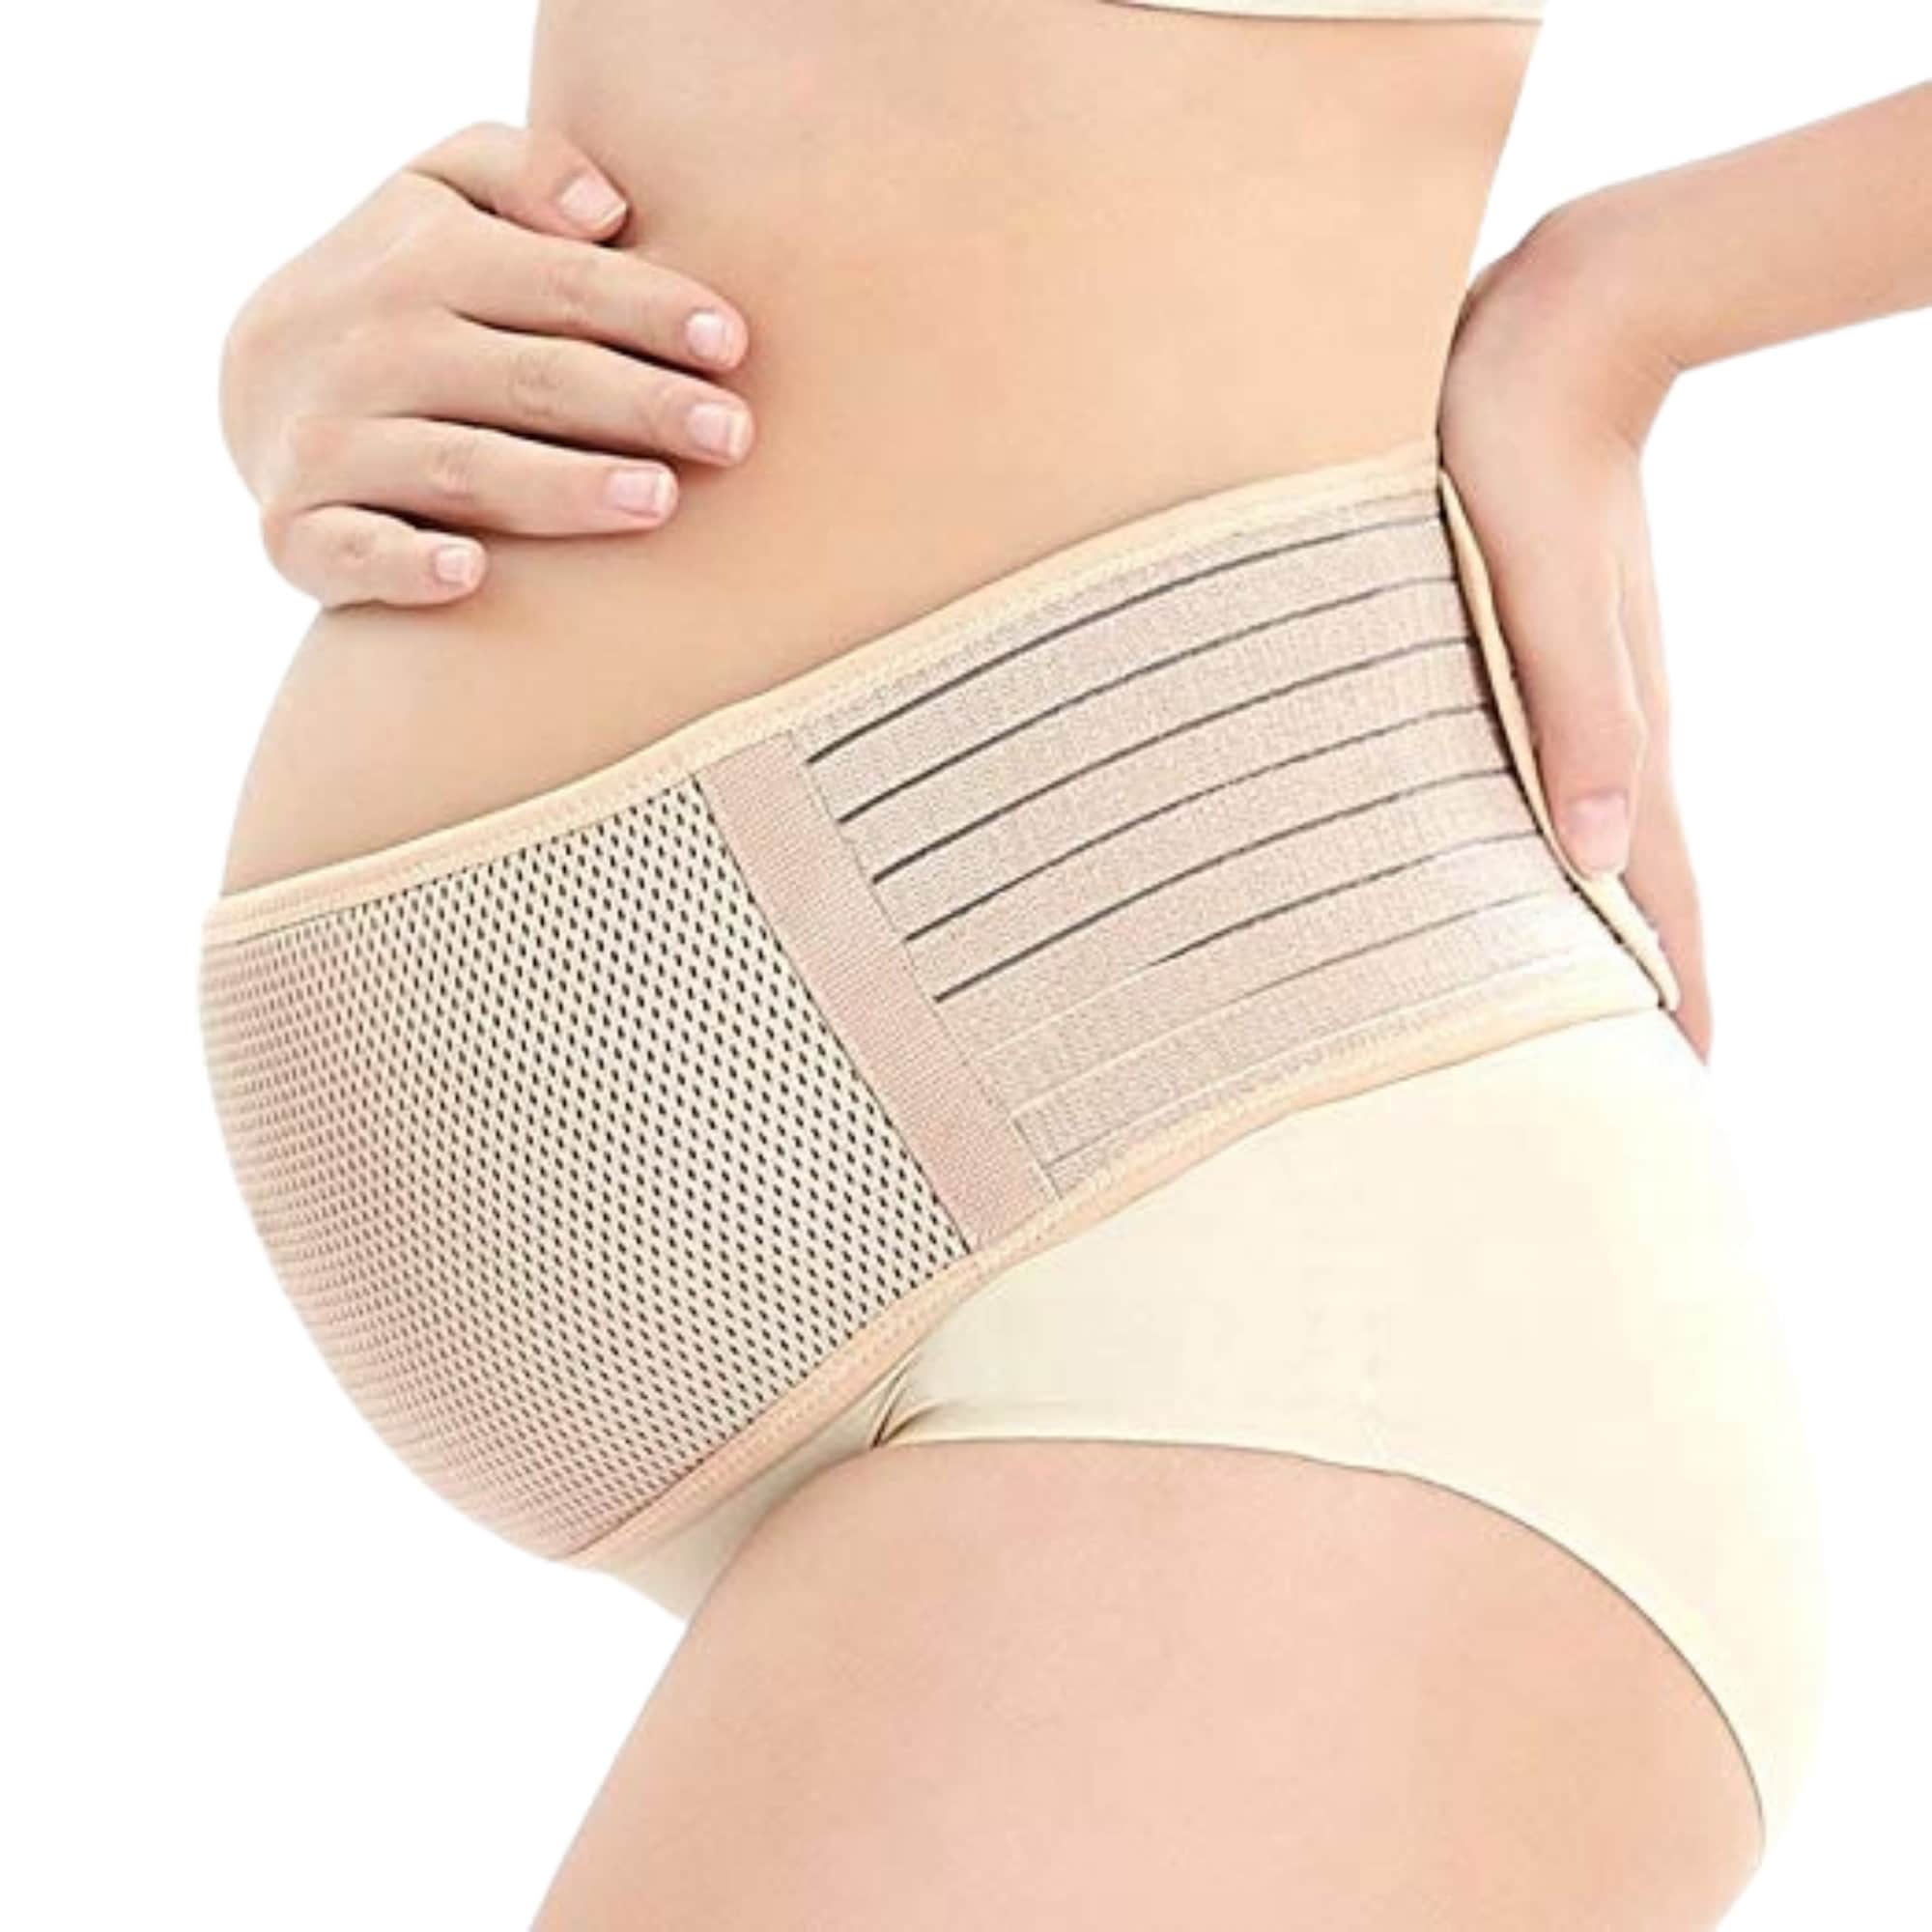 How to Shop for a Postpartum BellyBand – Body After Baby